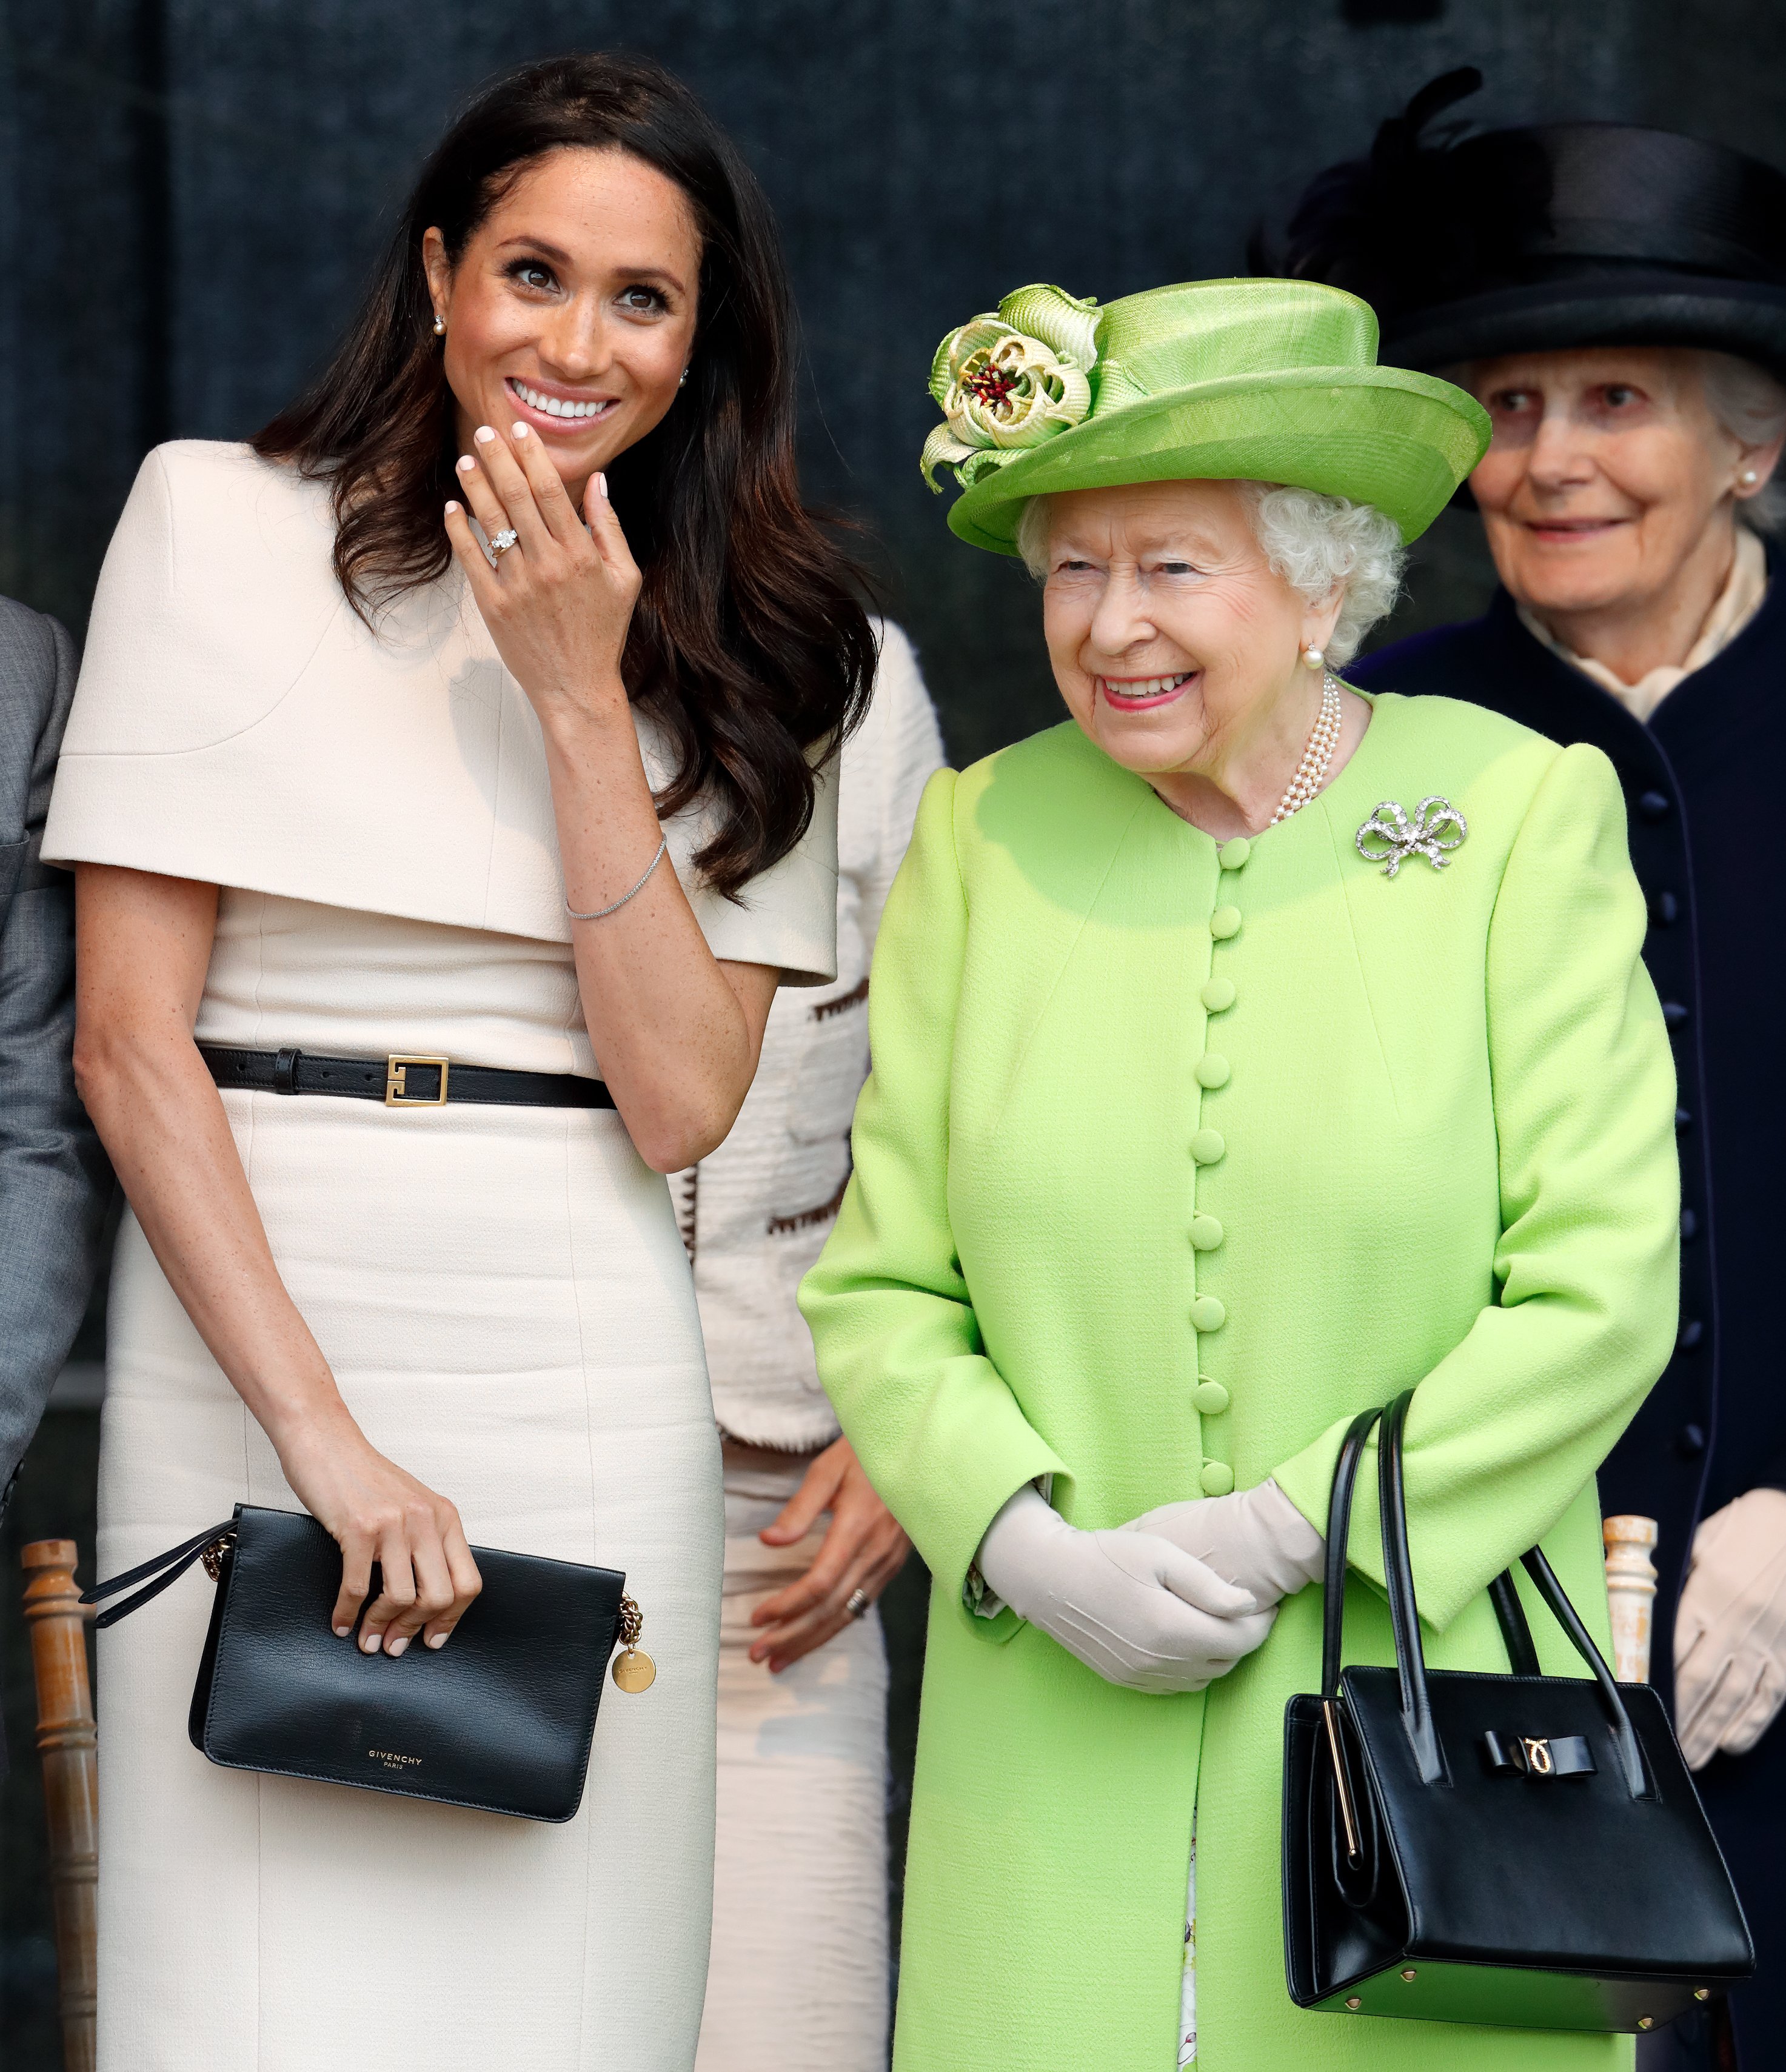  Meghan Markle and Queen Elizabeth II attend a ceremony to open the new Mersey Gateway Bridge on June 14, 2018 in Widnes, England. | Source: Getty Images